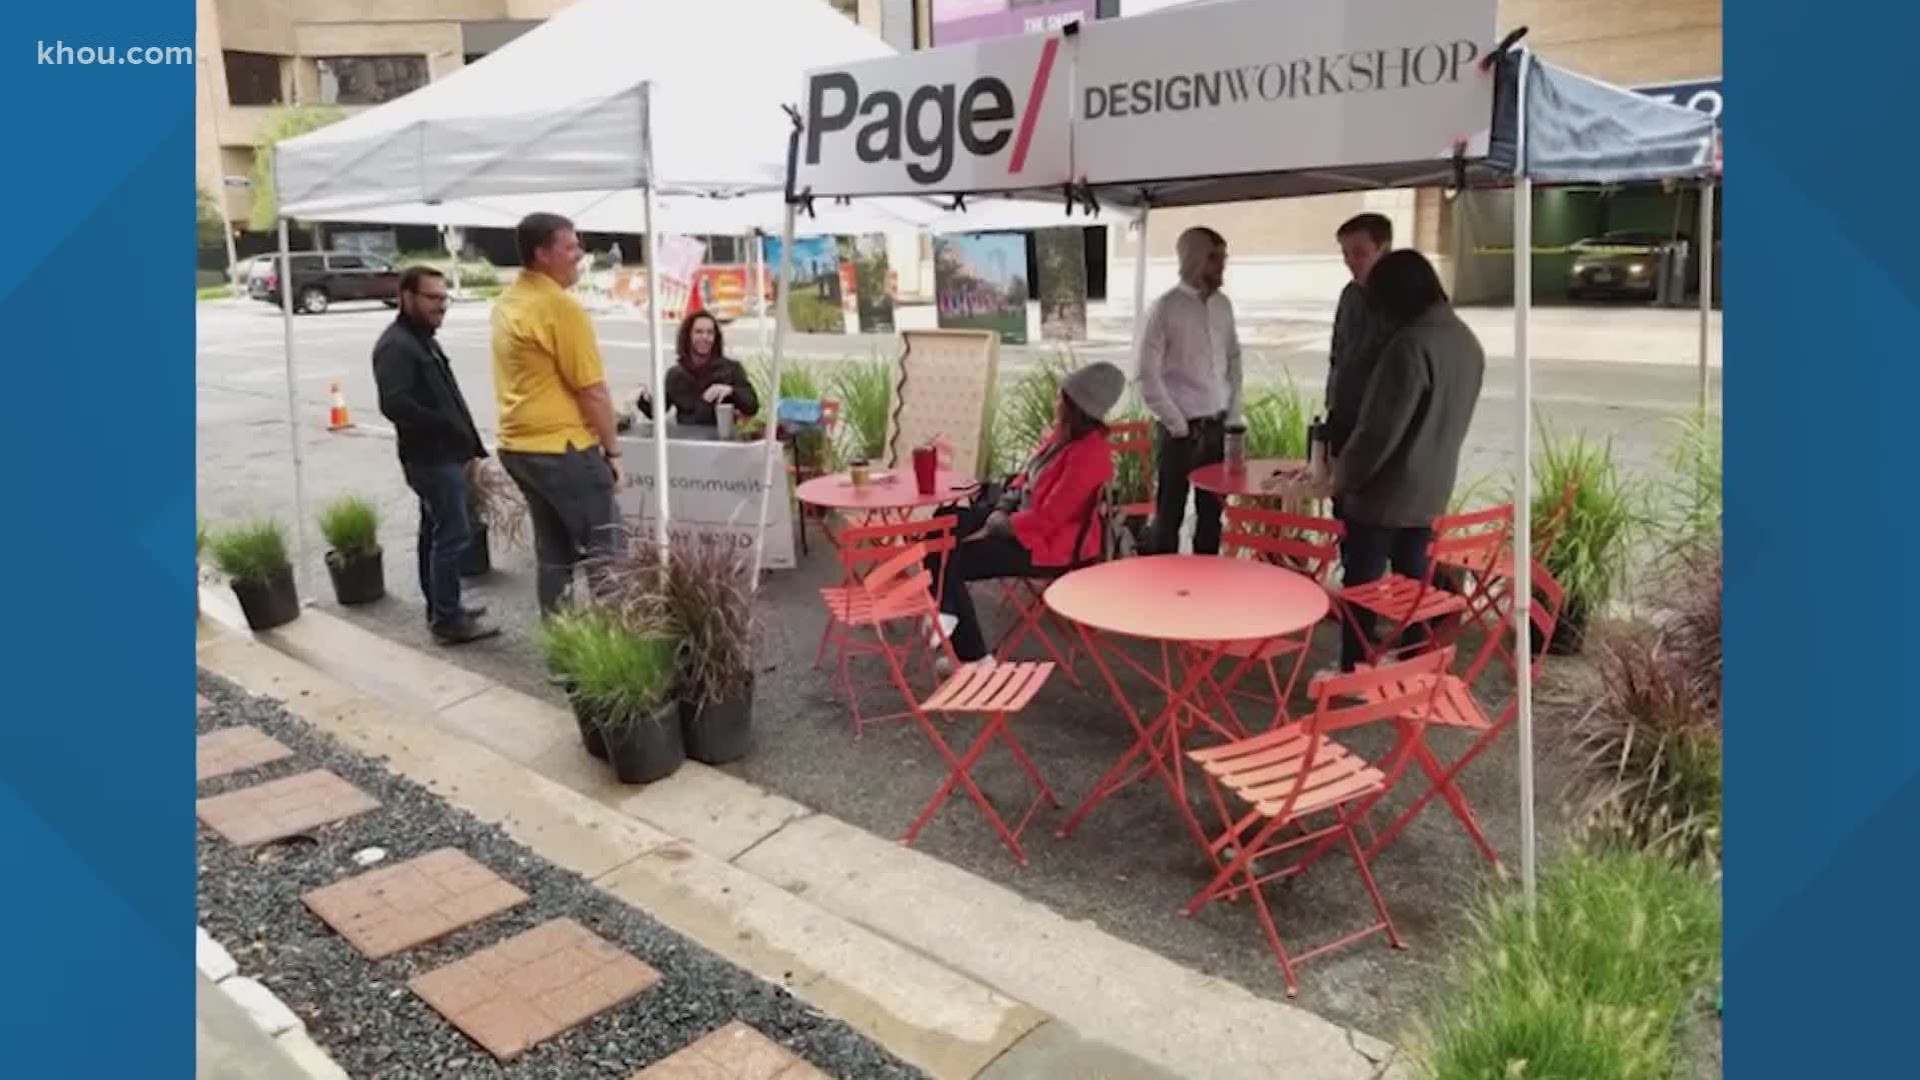 Parklets are basically parking spots that have been converted into a dining area.